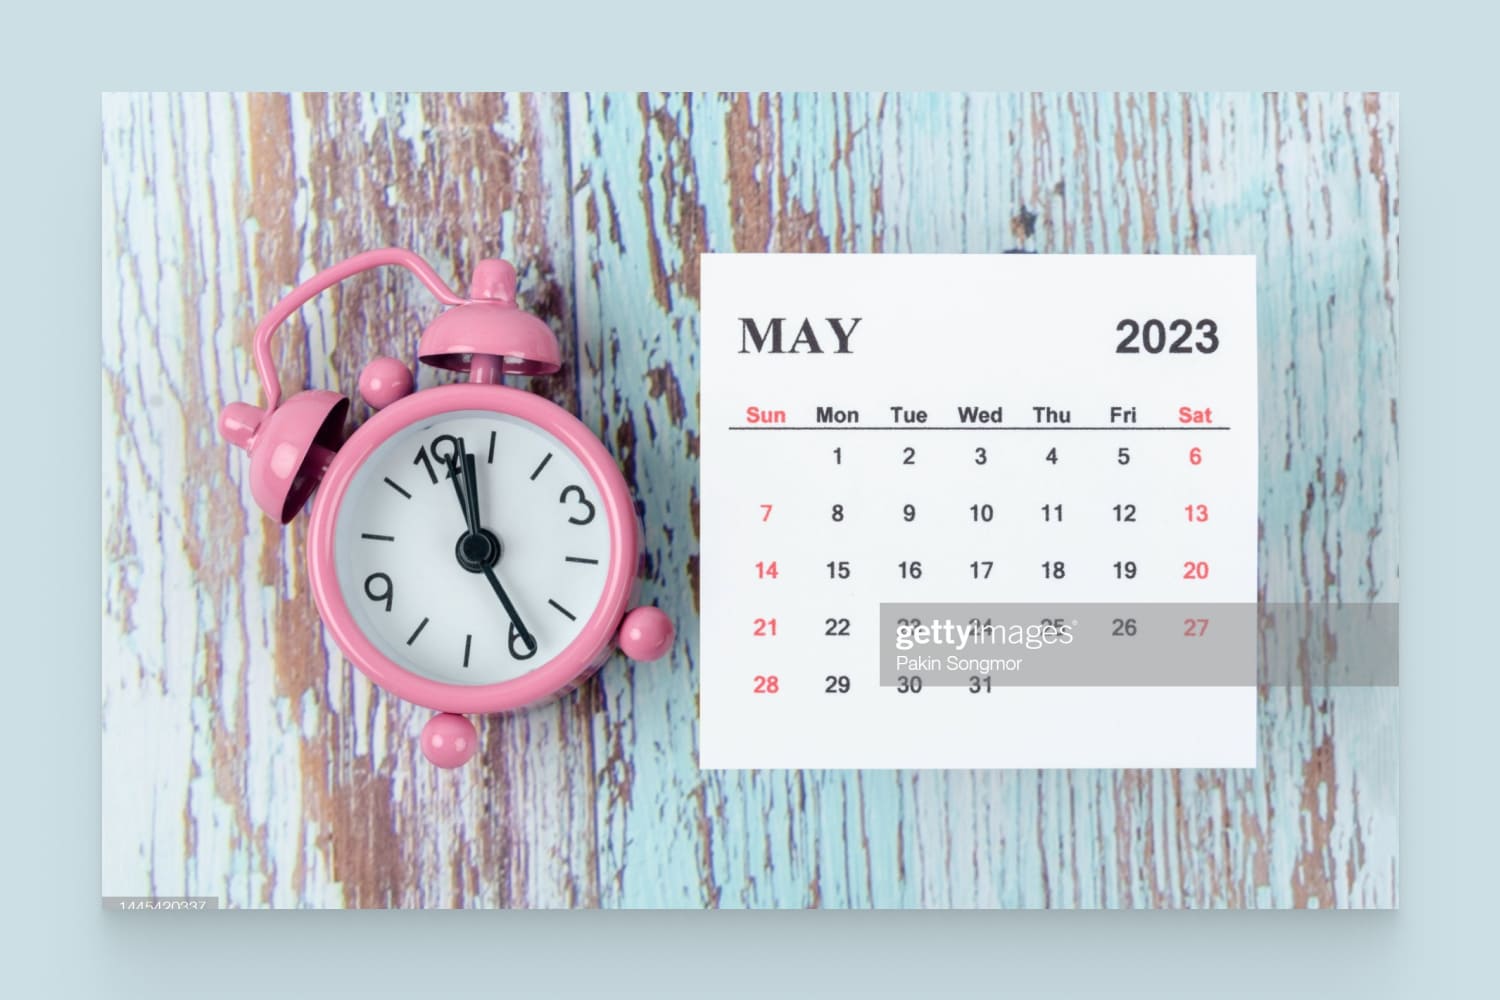 Calendar for May 2023 with an alarm clock on a wooden table background.